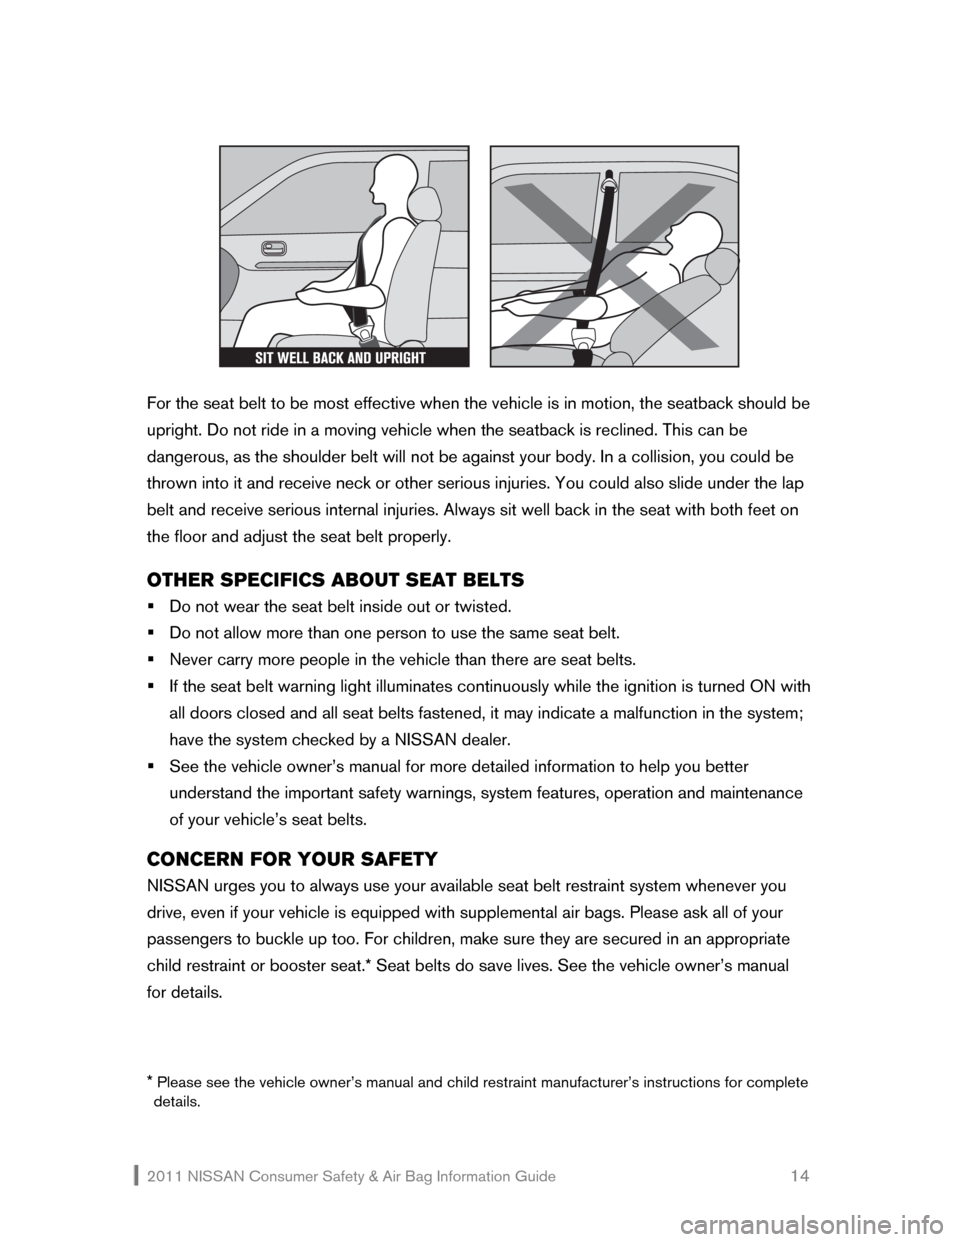 NISSAN SENTRA 2011 B16 / 6.G Consumer Safety Air Bag Information Guide 2011 NISSAN Consumer Safety & Air Bag Information Guide                                                       14 
 
 
 
For the seat belt to be most effective when the vehicle is in motion, the seatba